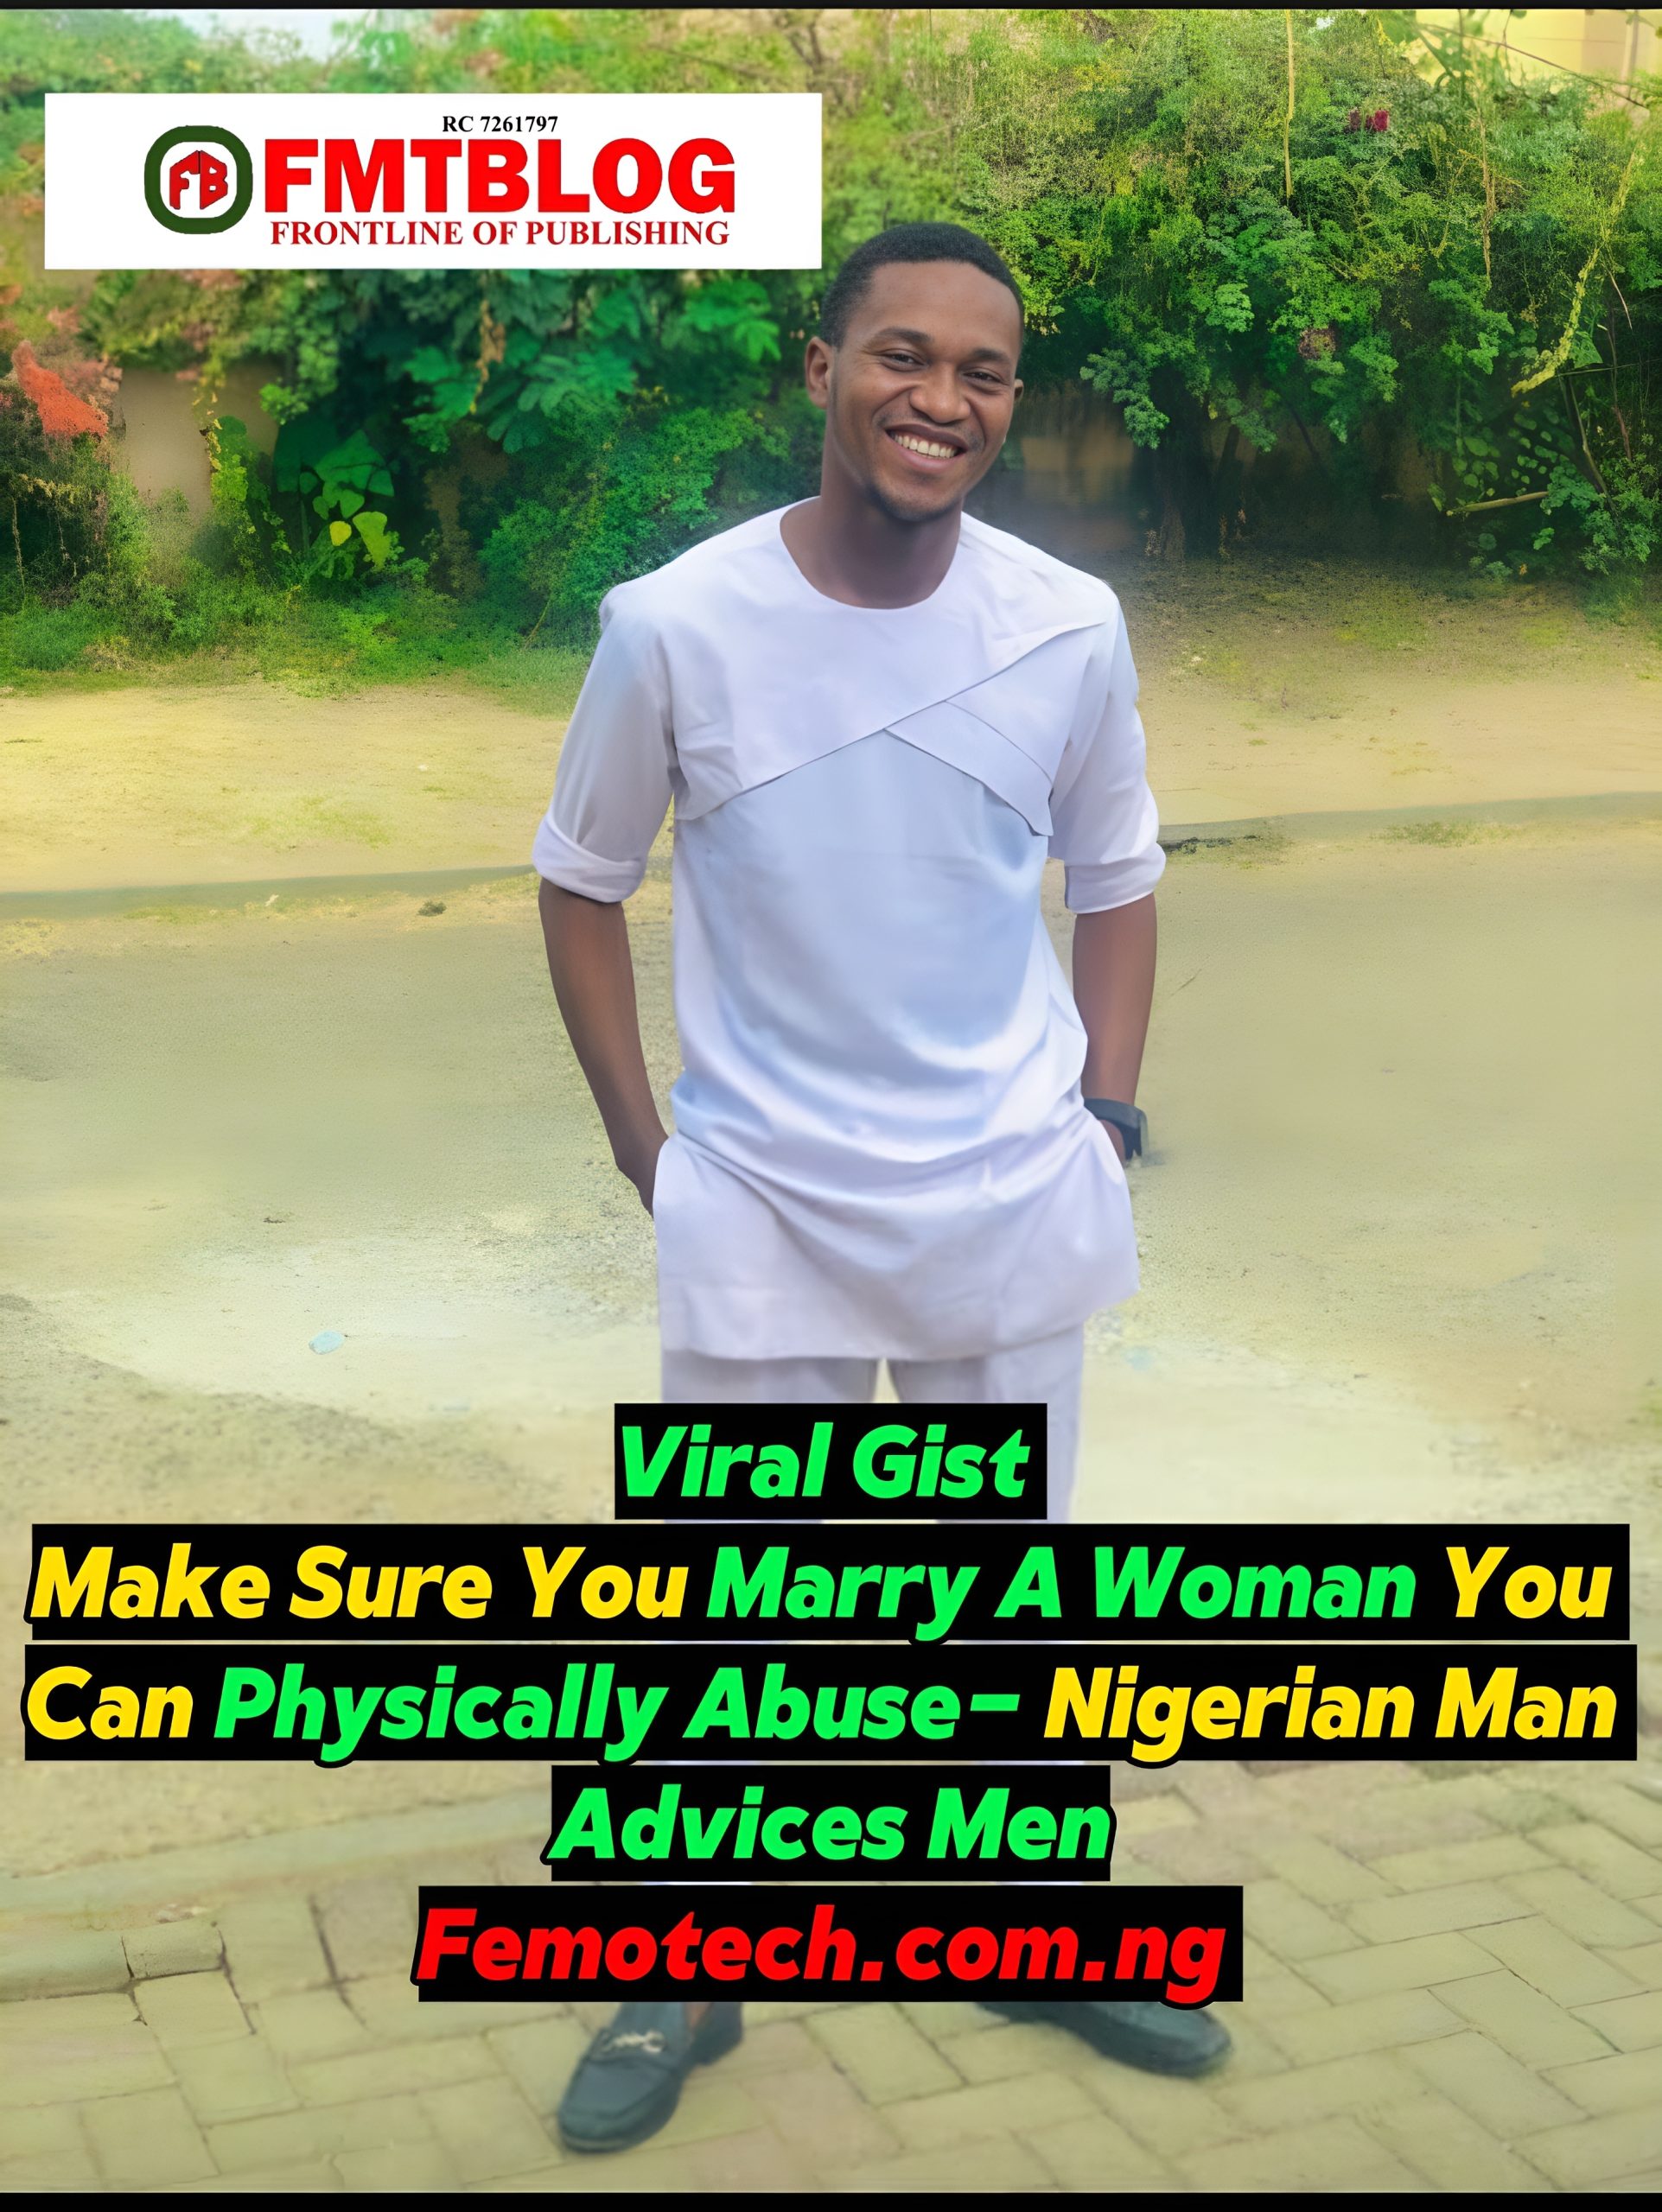 Make Sure You Marry A Woman You Can Physically Abuse- Nigerian Man Advices Men